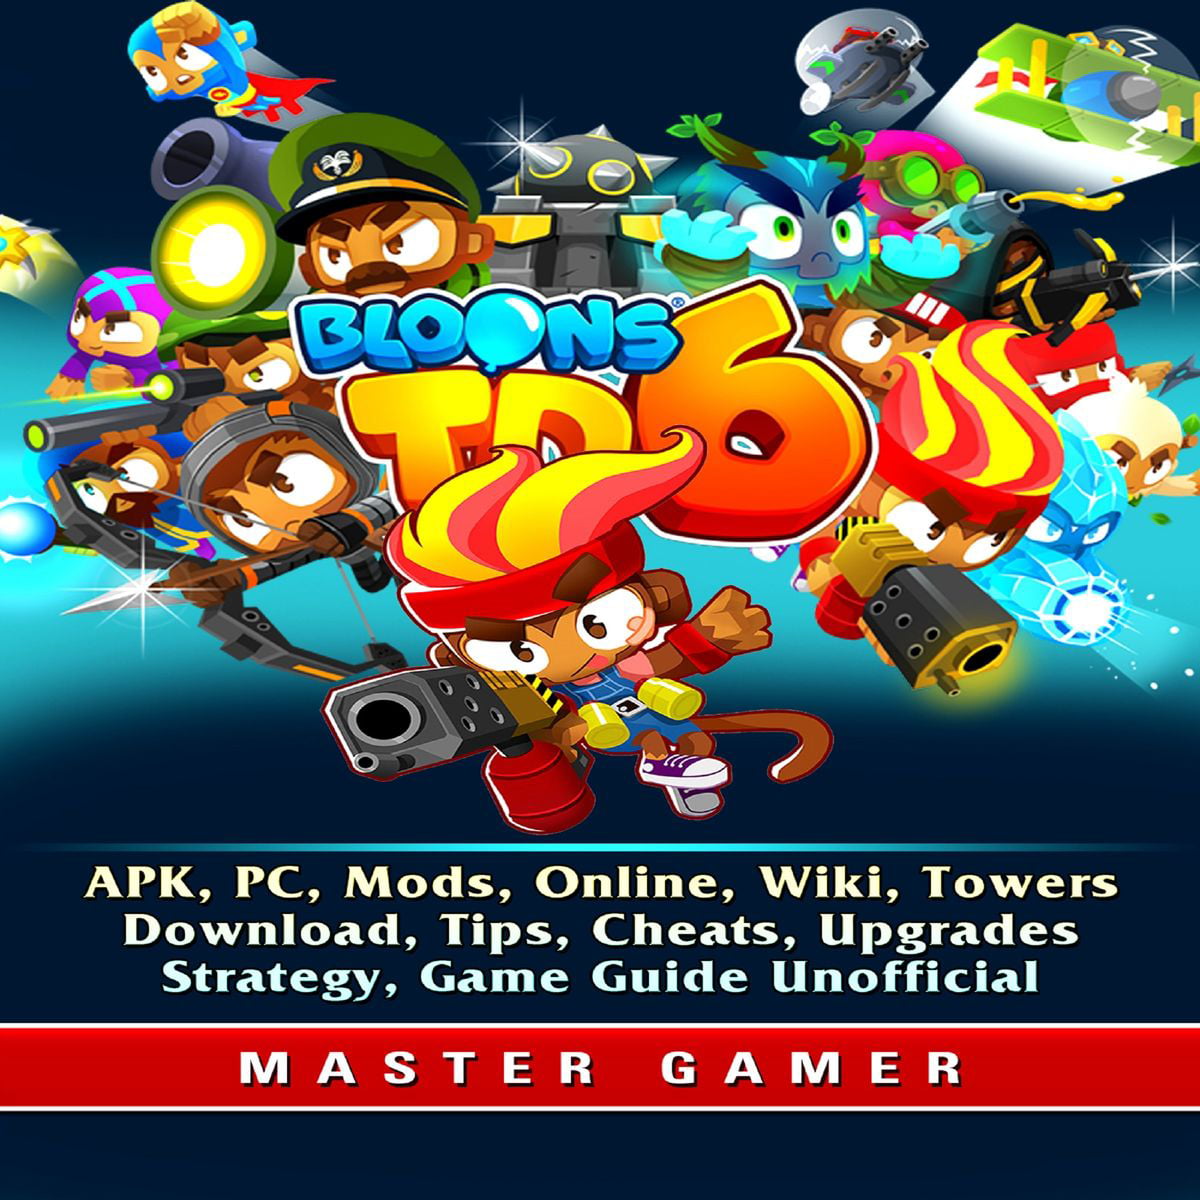 bloons td 6 pc cheat engine